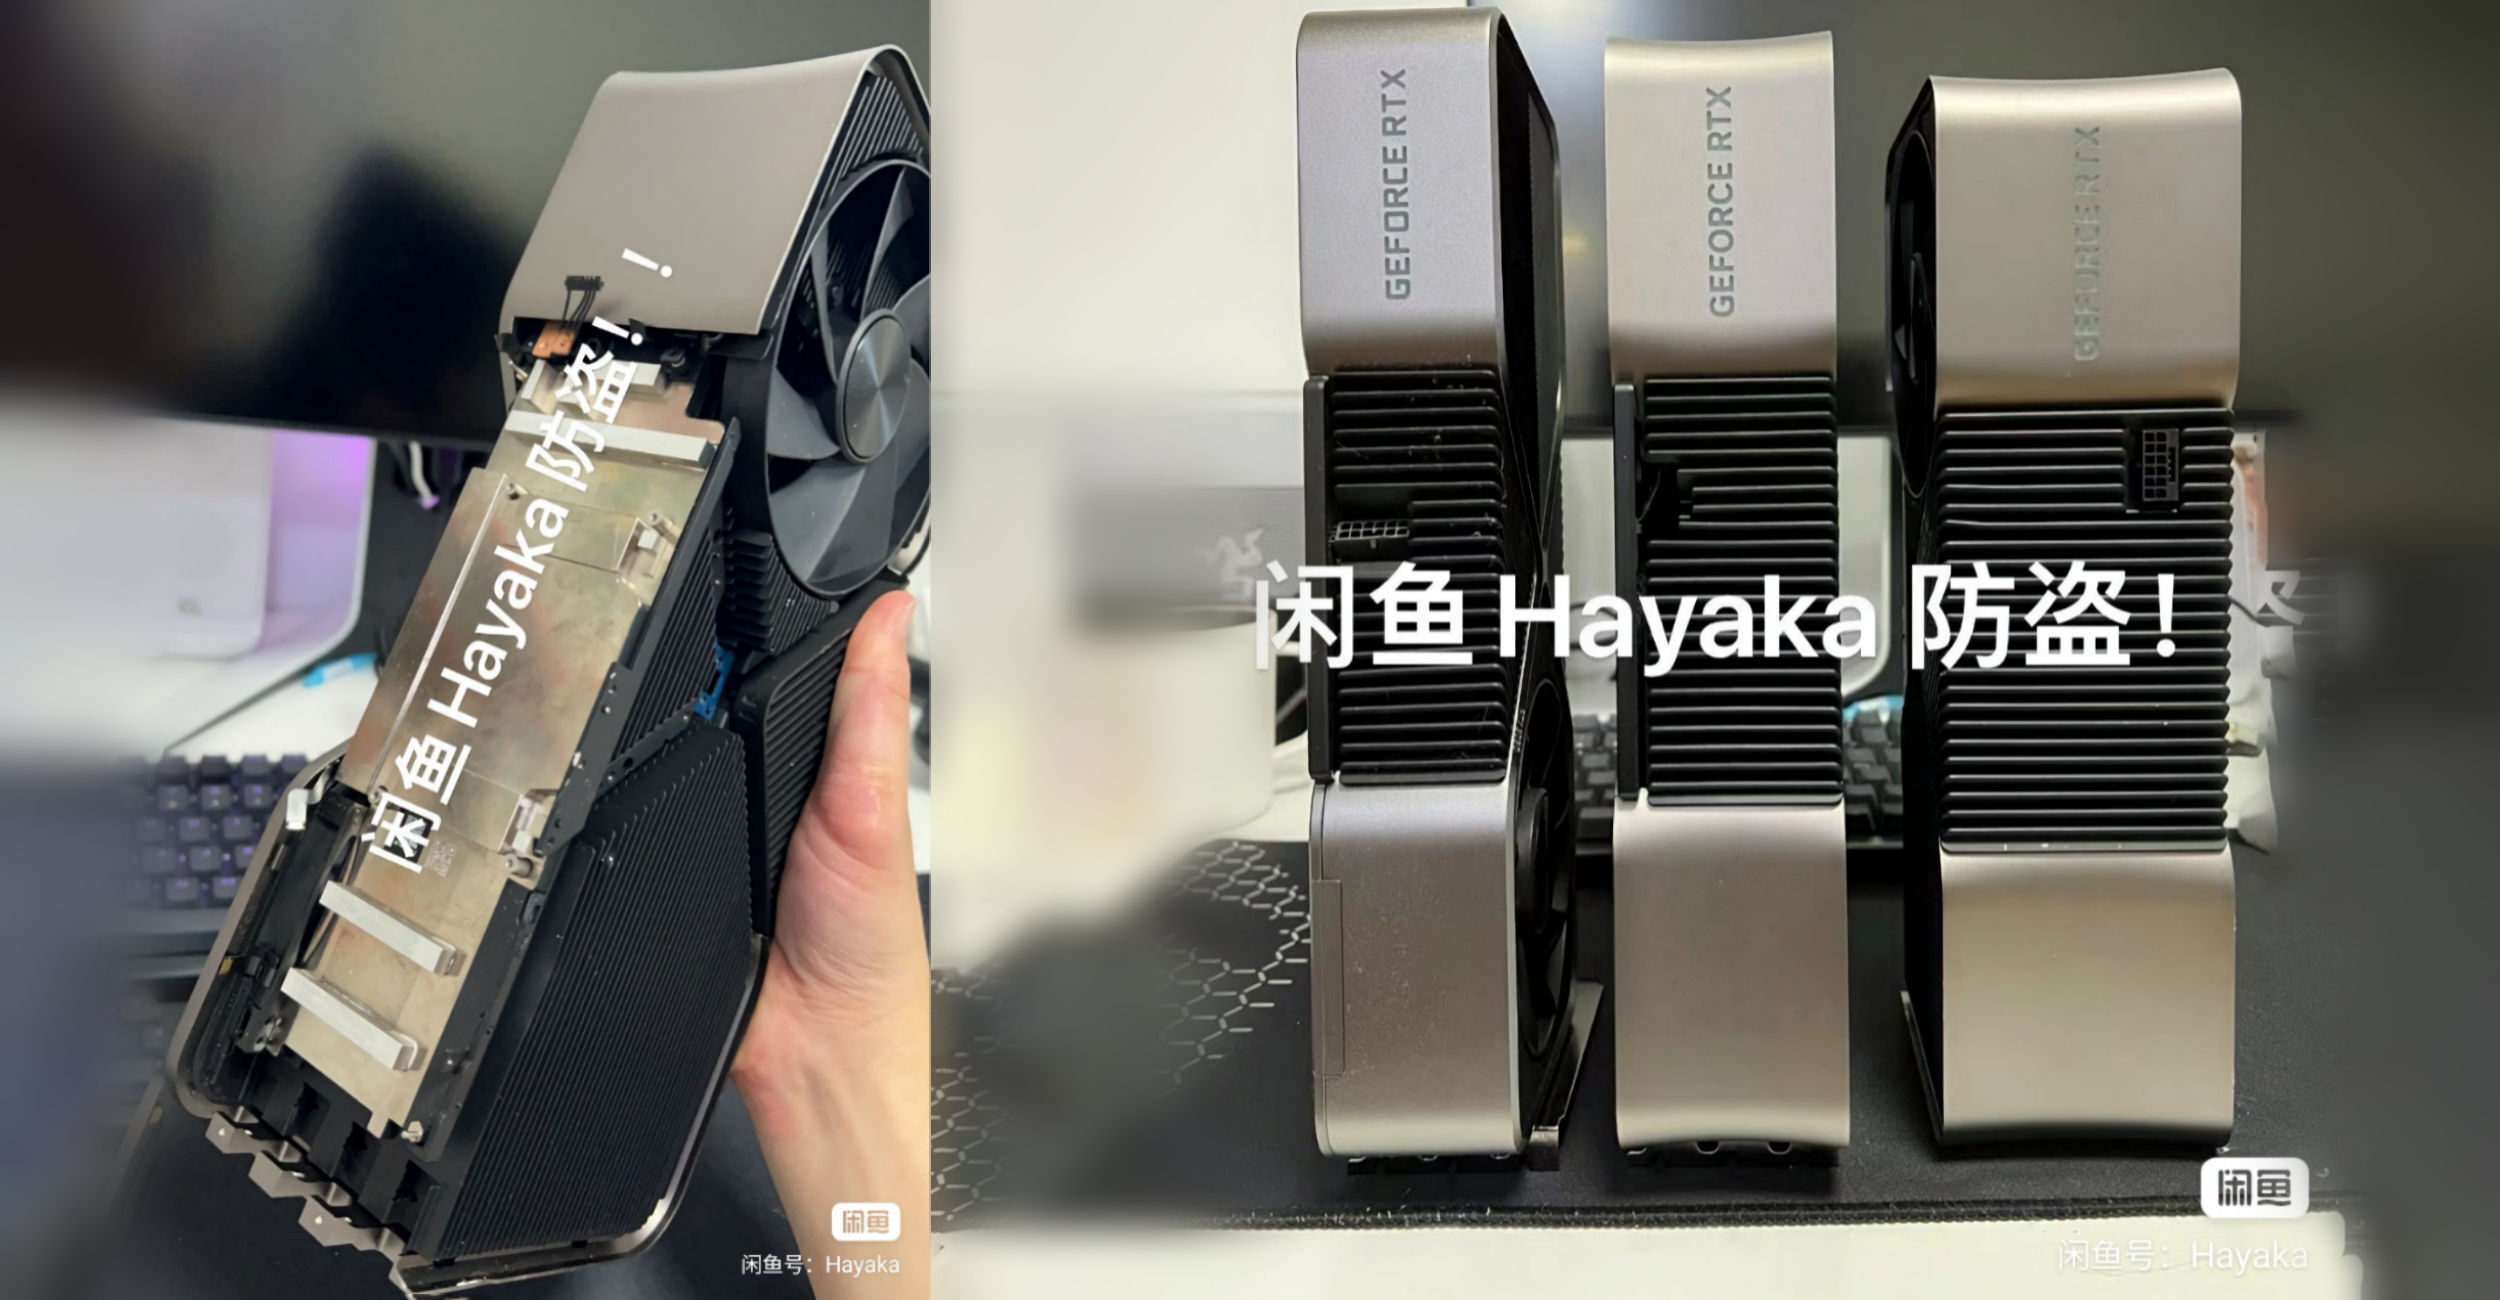 NVIDIA GeForce RTX 4090 Ti cooler prototype: listed for $120,000 USD in China